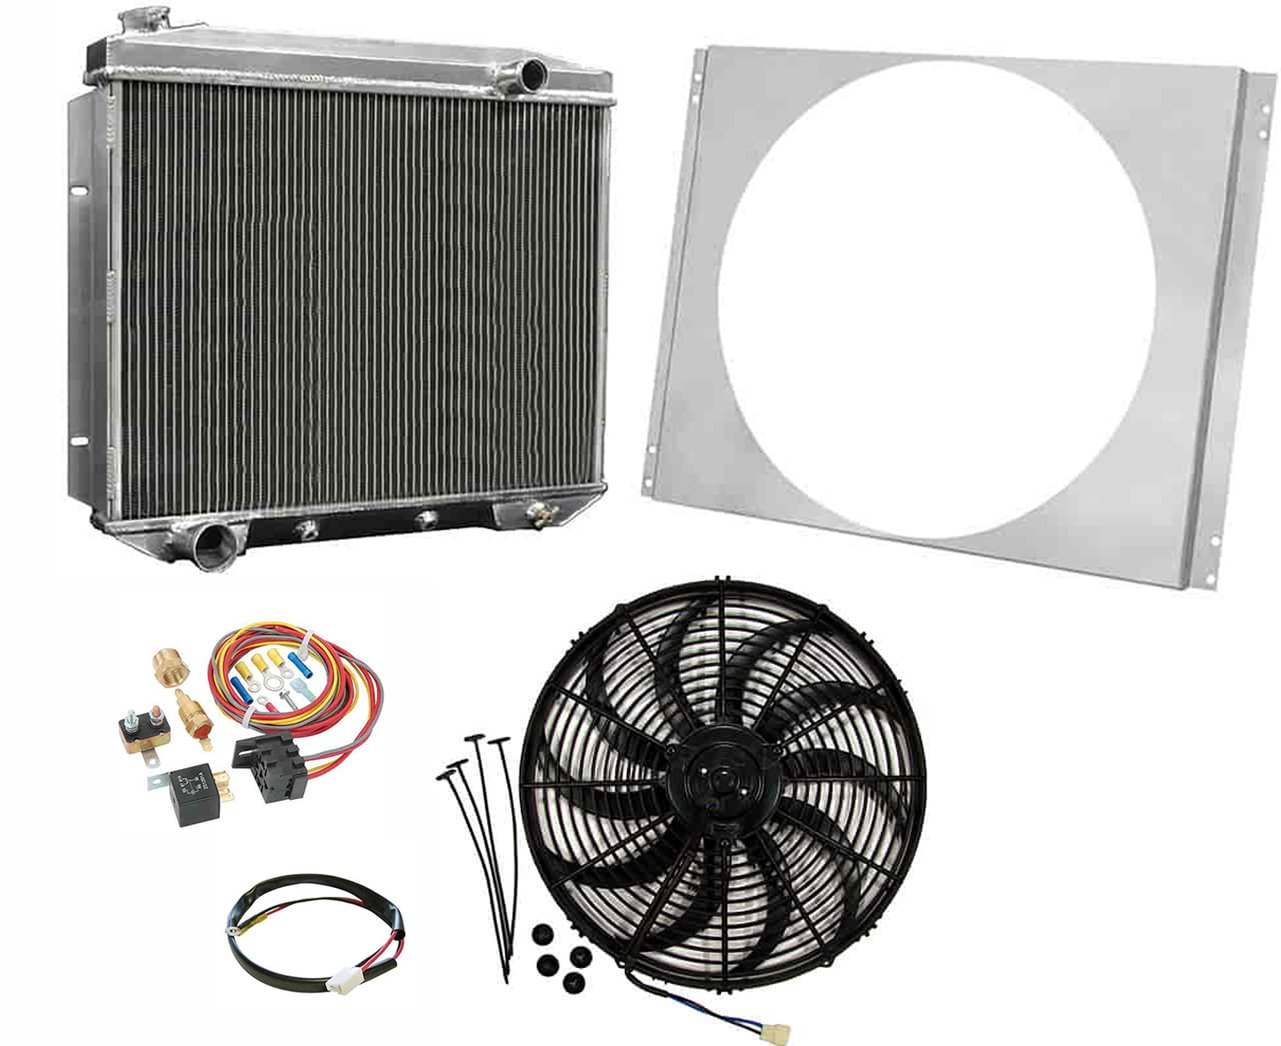 CC5759 All-Aluminum Radiator System Kit for Select 1957-1959 Ford Vehicles